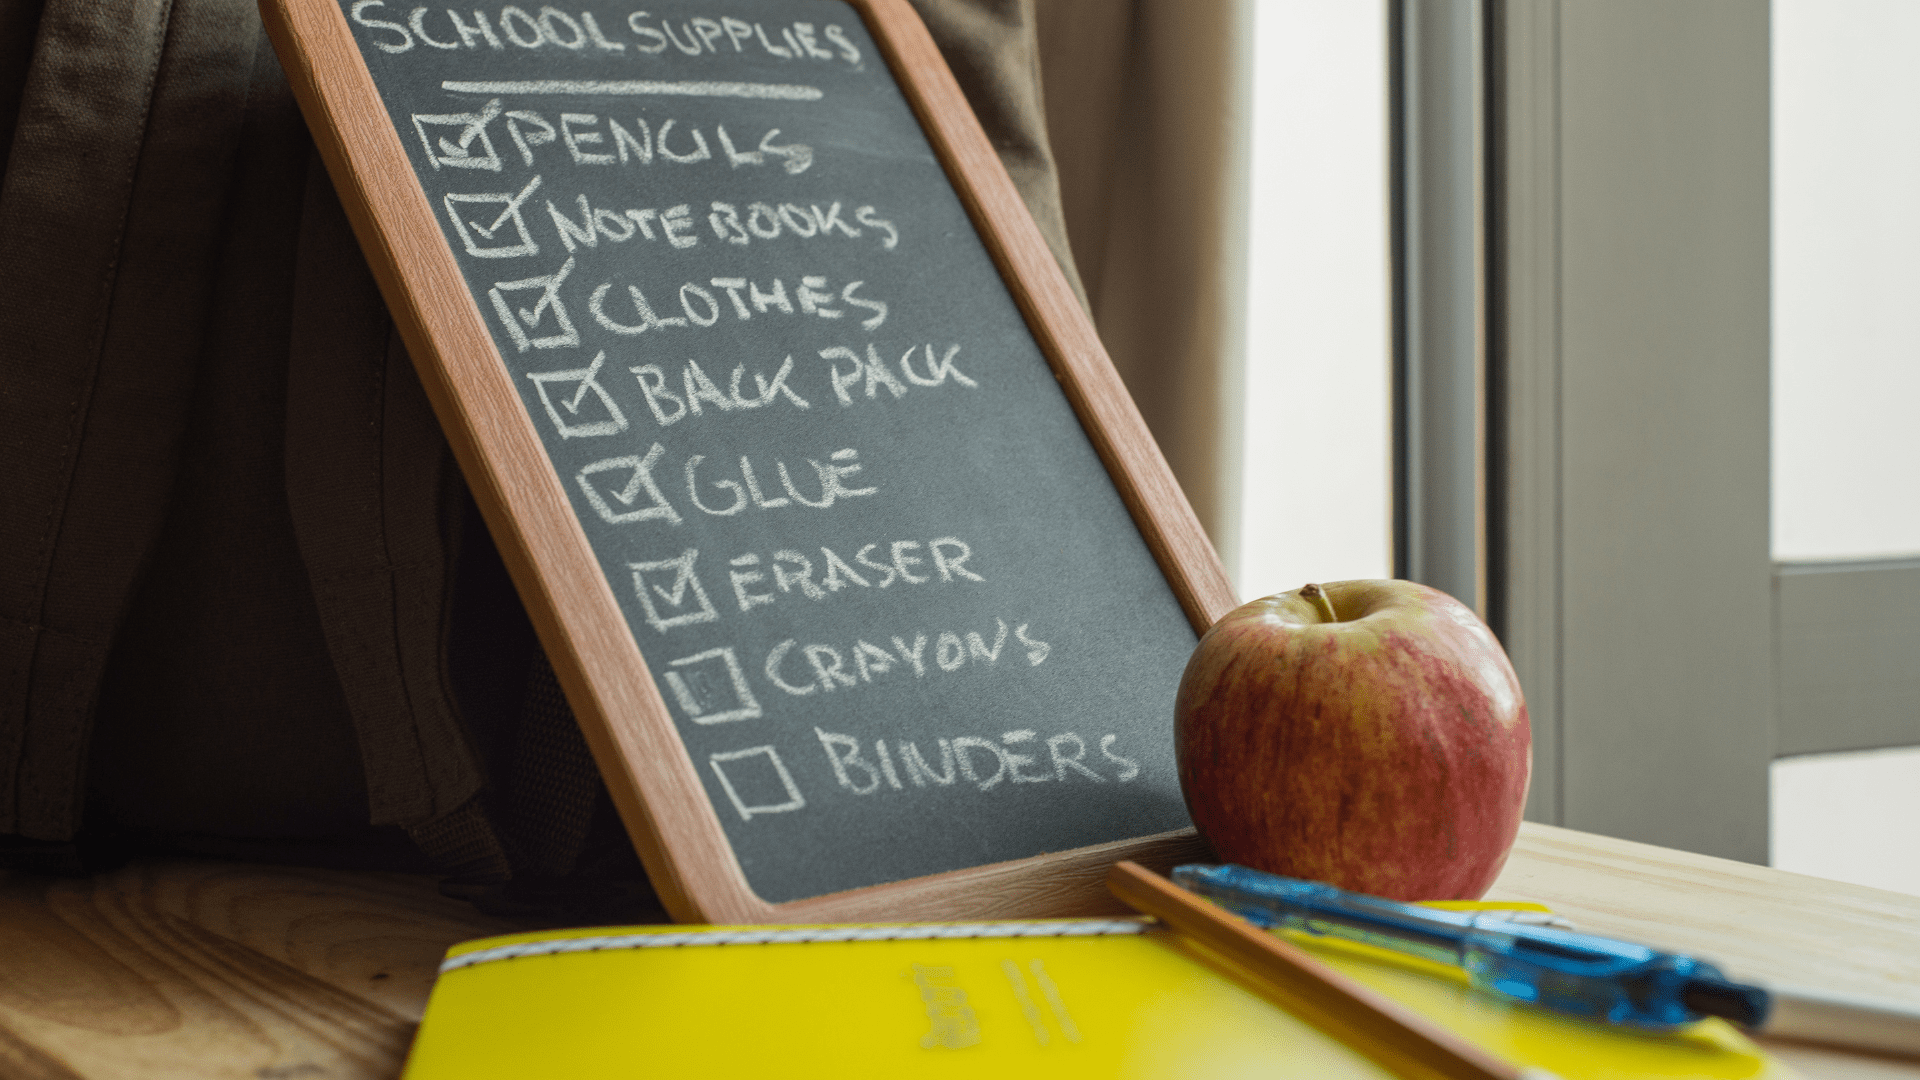 Chalkboard with a list of school supplies